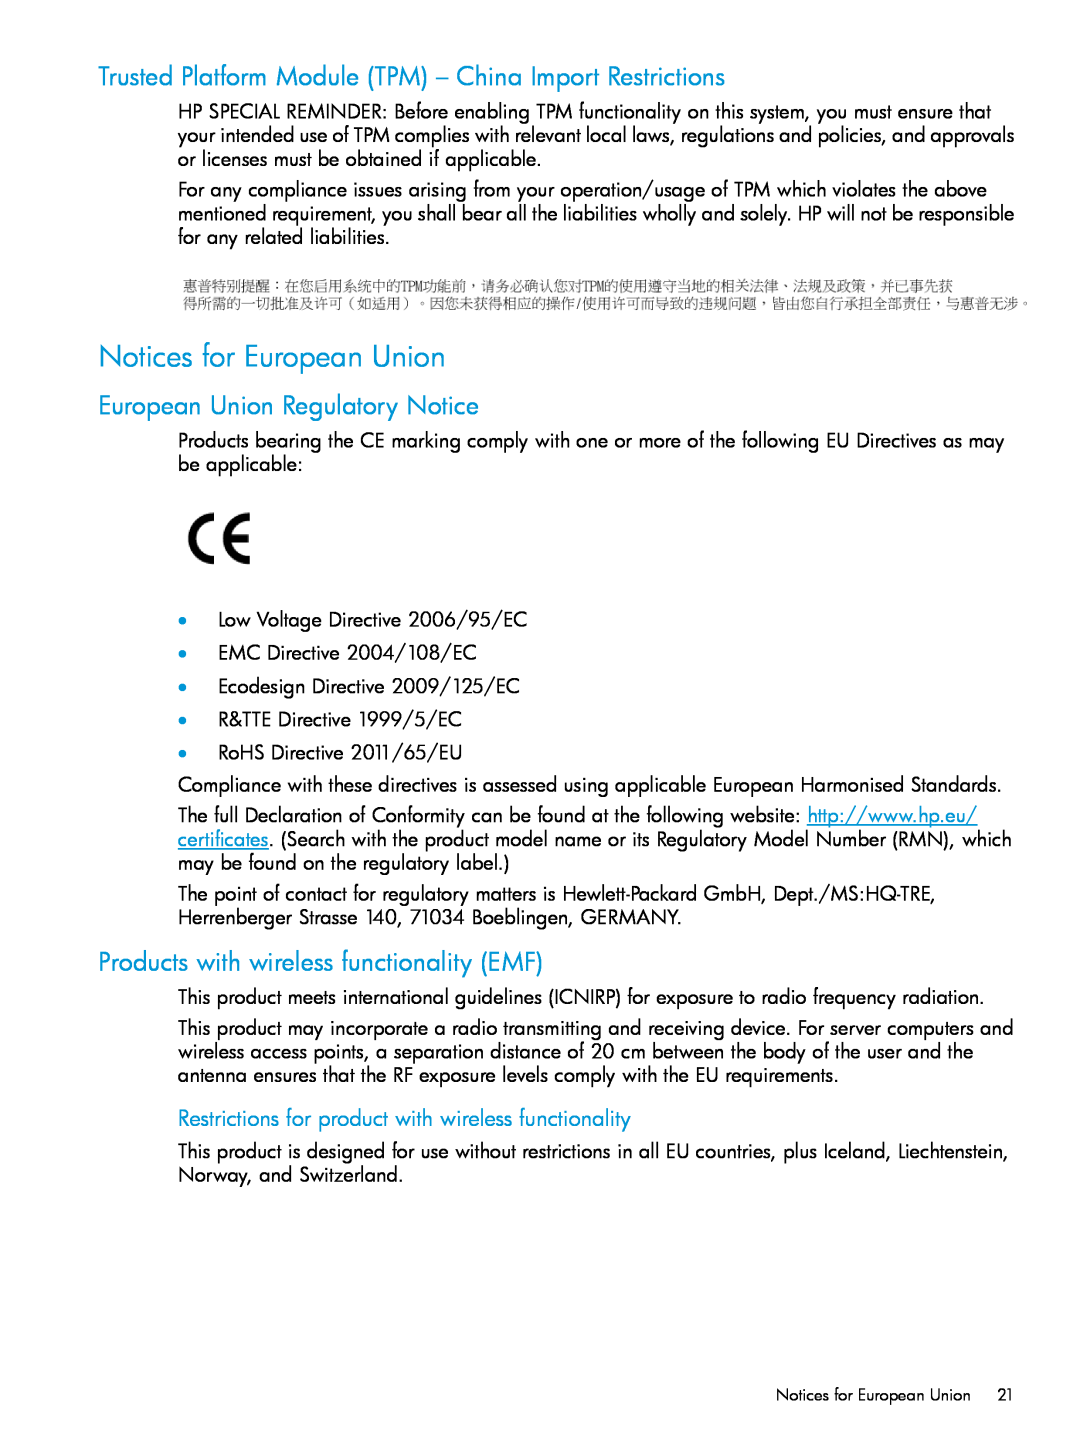 HP Networking Safety and Compliance Notices for European Union, Trusted Platform Module TPM - China Import Restrictions 